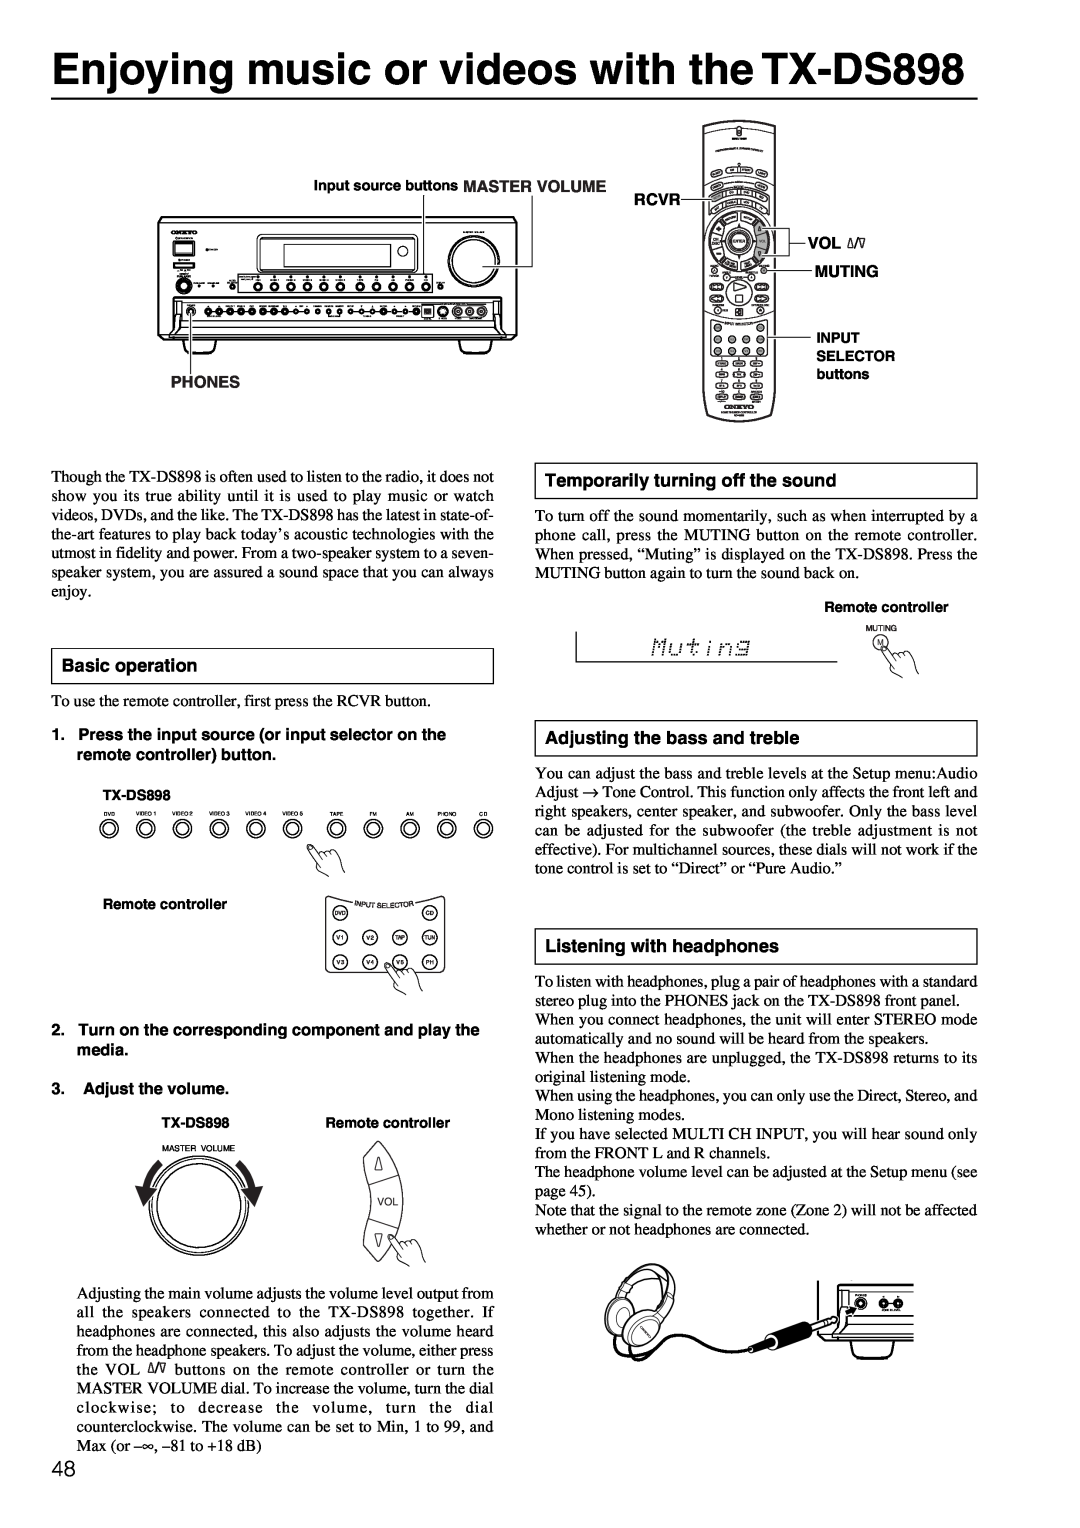 Onkyo instruction manual Enjoying music or videos with the TX-DS898, Temporarily turning off the sound, Basic operation 